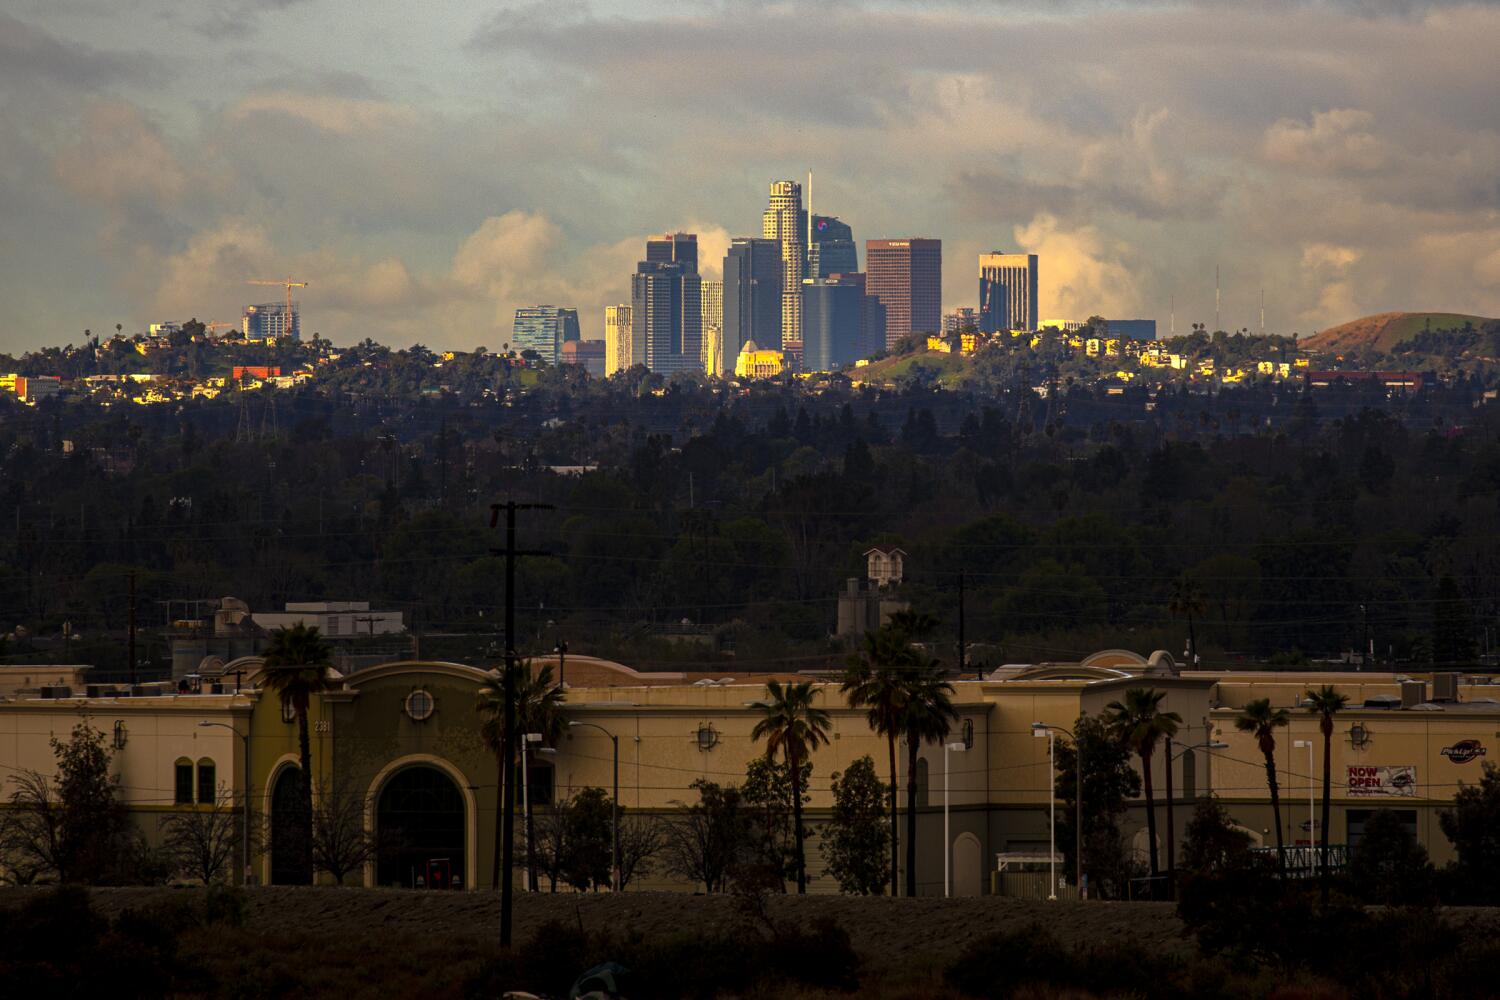 L.A. County property values hit a record $2 trillion, up nearly 6%, assessor says